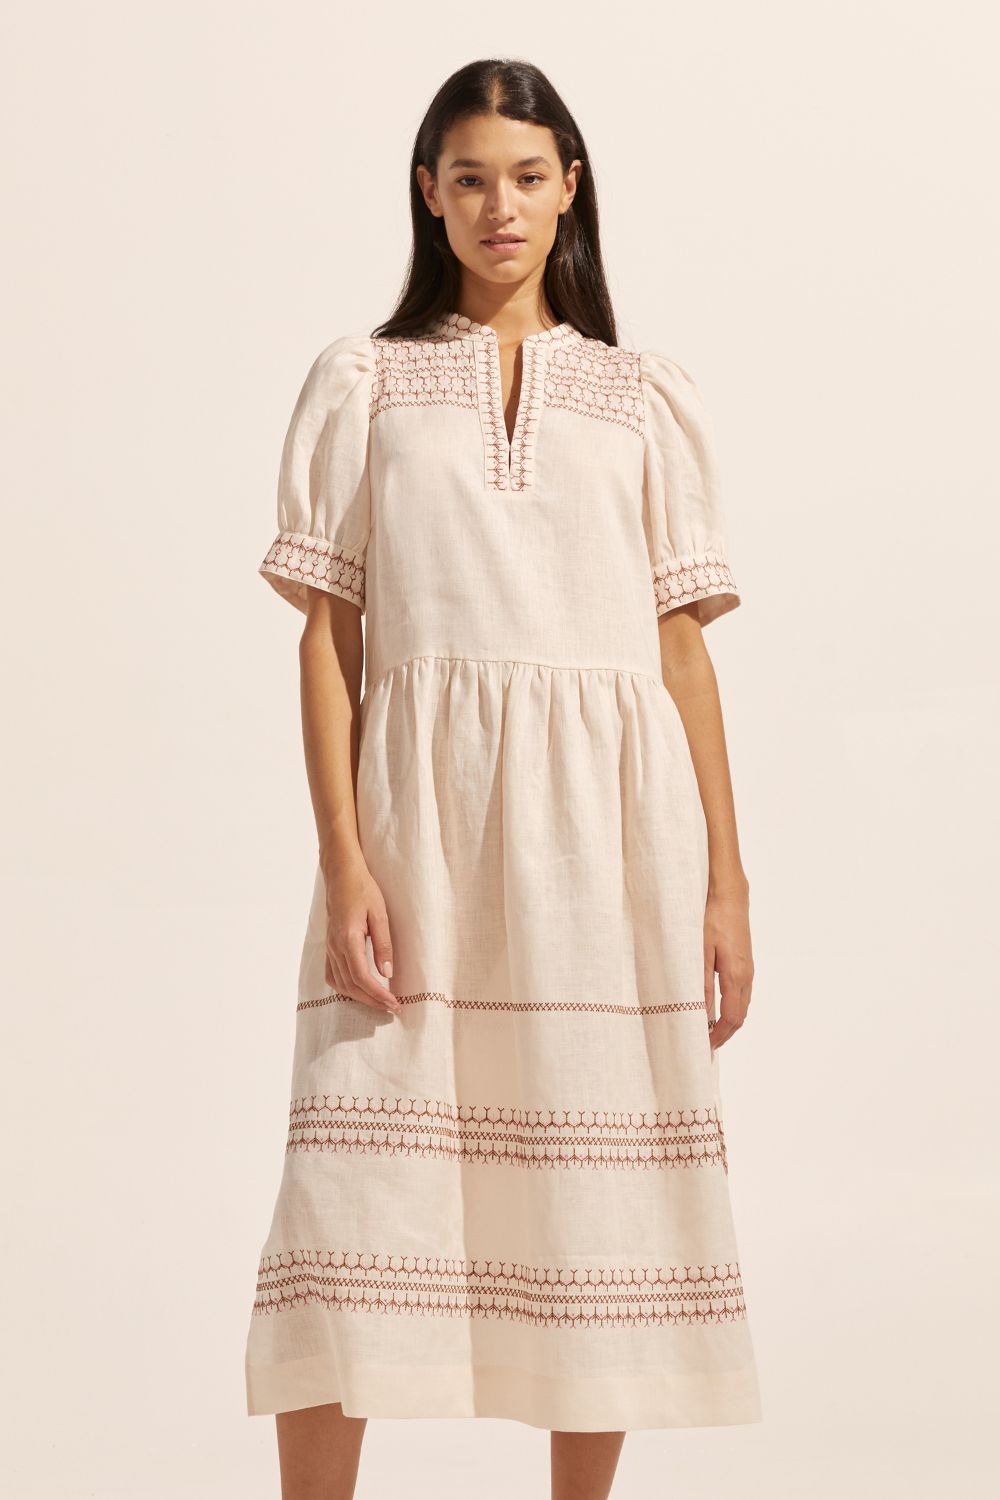 cream, embroidered, midi dress, mid-length sleeve, rounded neckline, side pockets, drop waist, side splits, front image